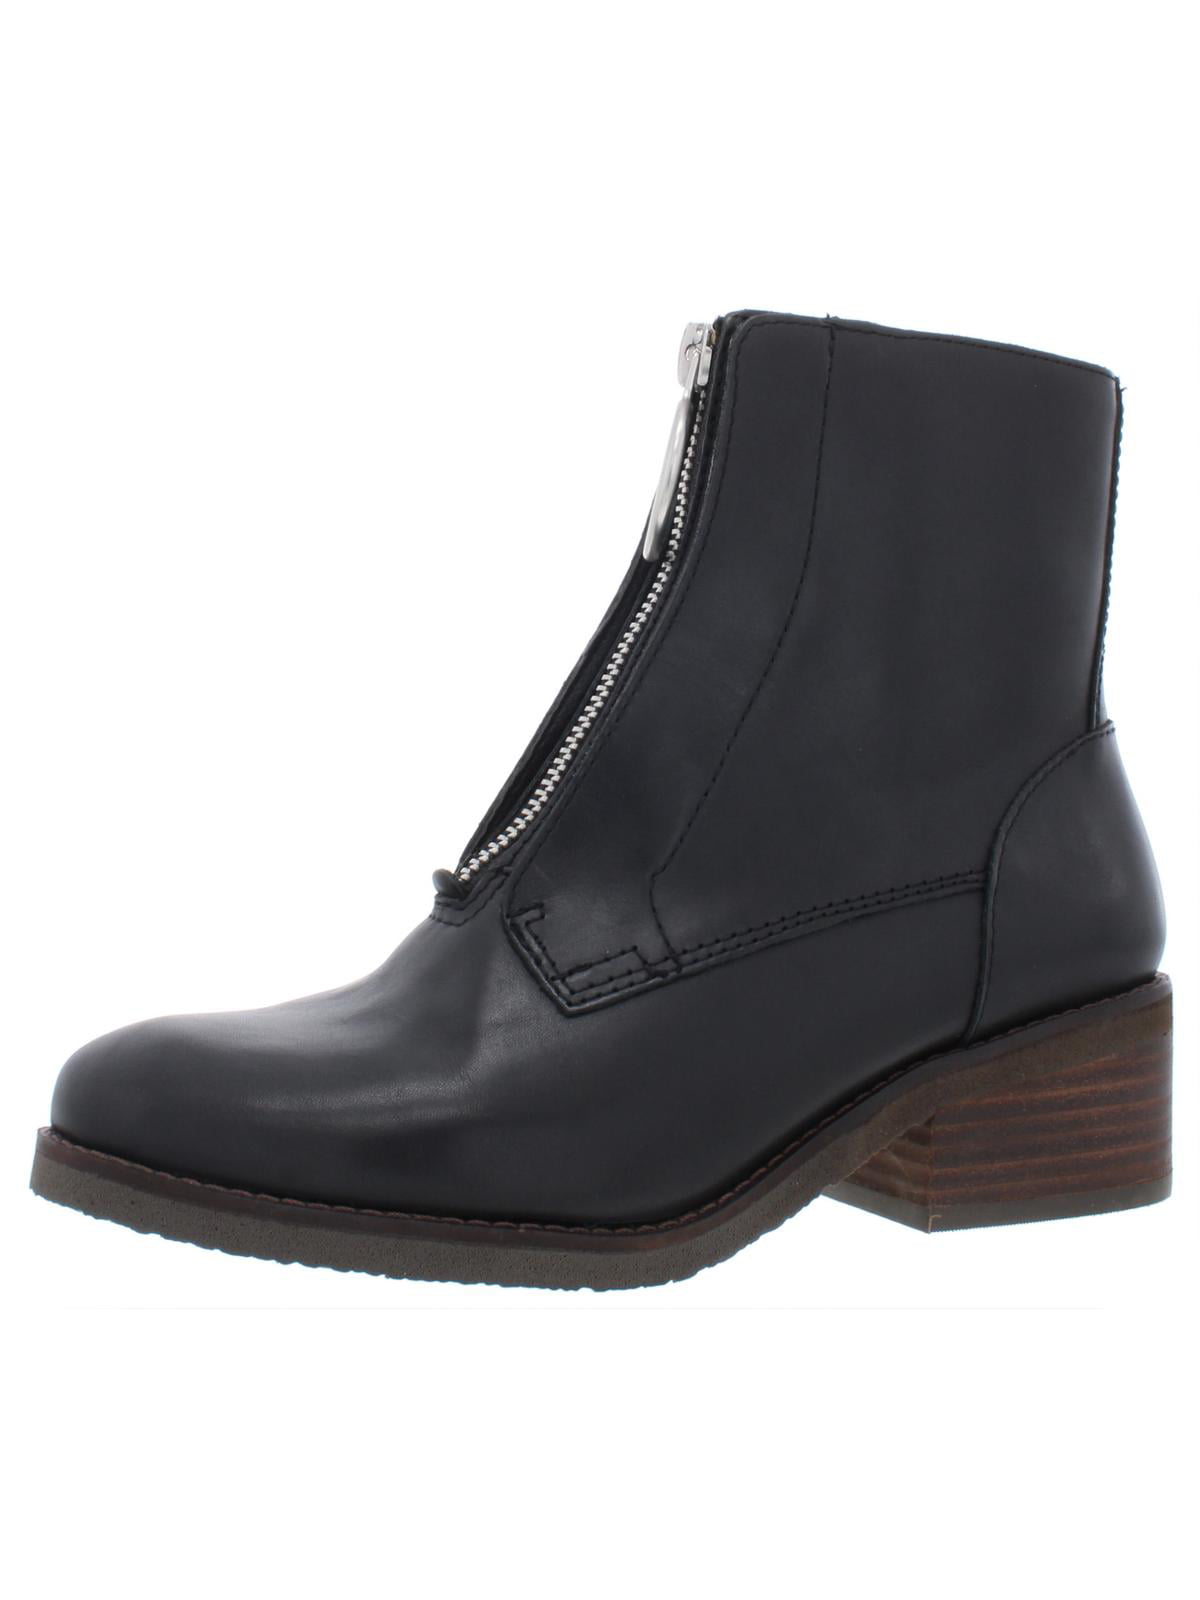 Lucky Brand Womens Tibly Leather Zip Up Ankle Boots - Walmart.com